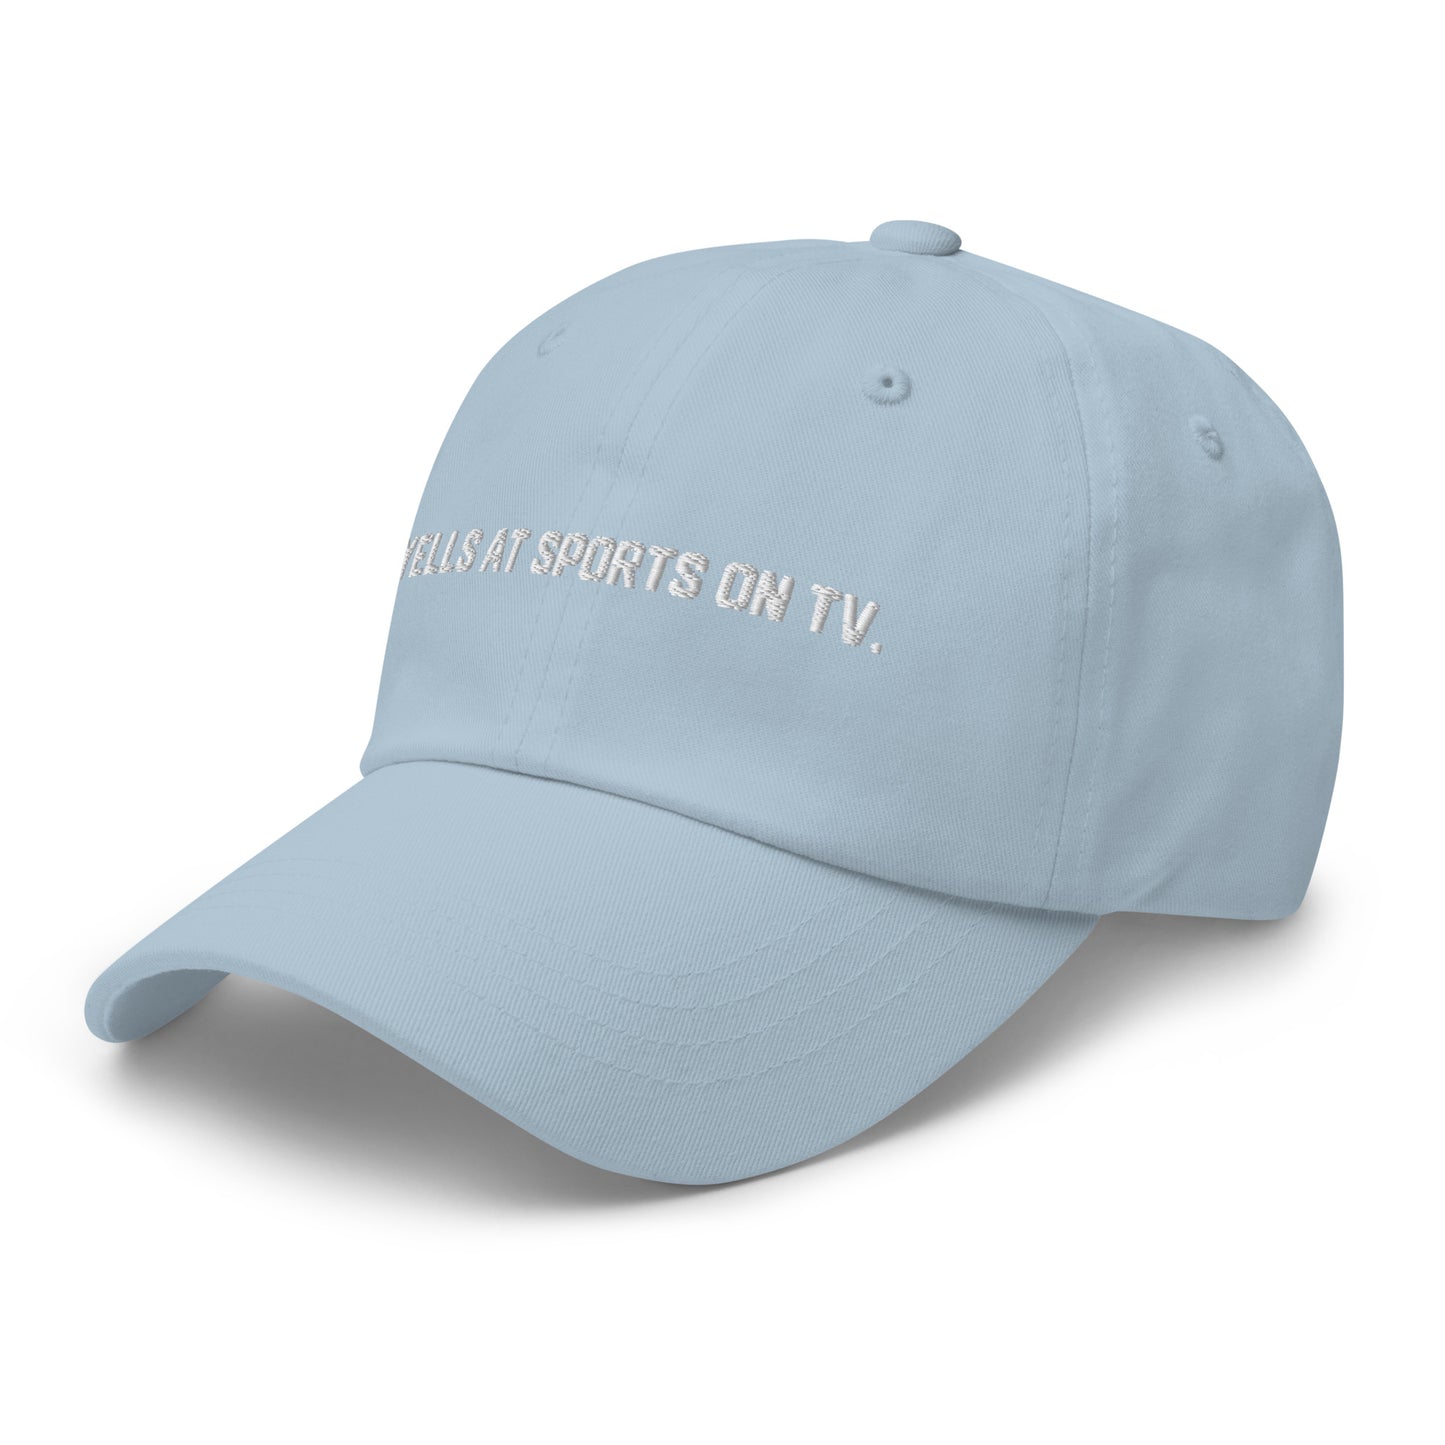 Yells at Sports on TV - Dad Hat